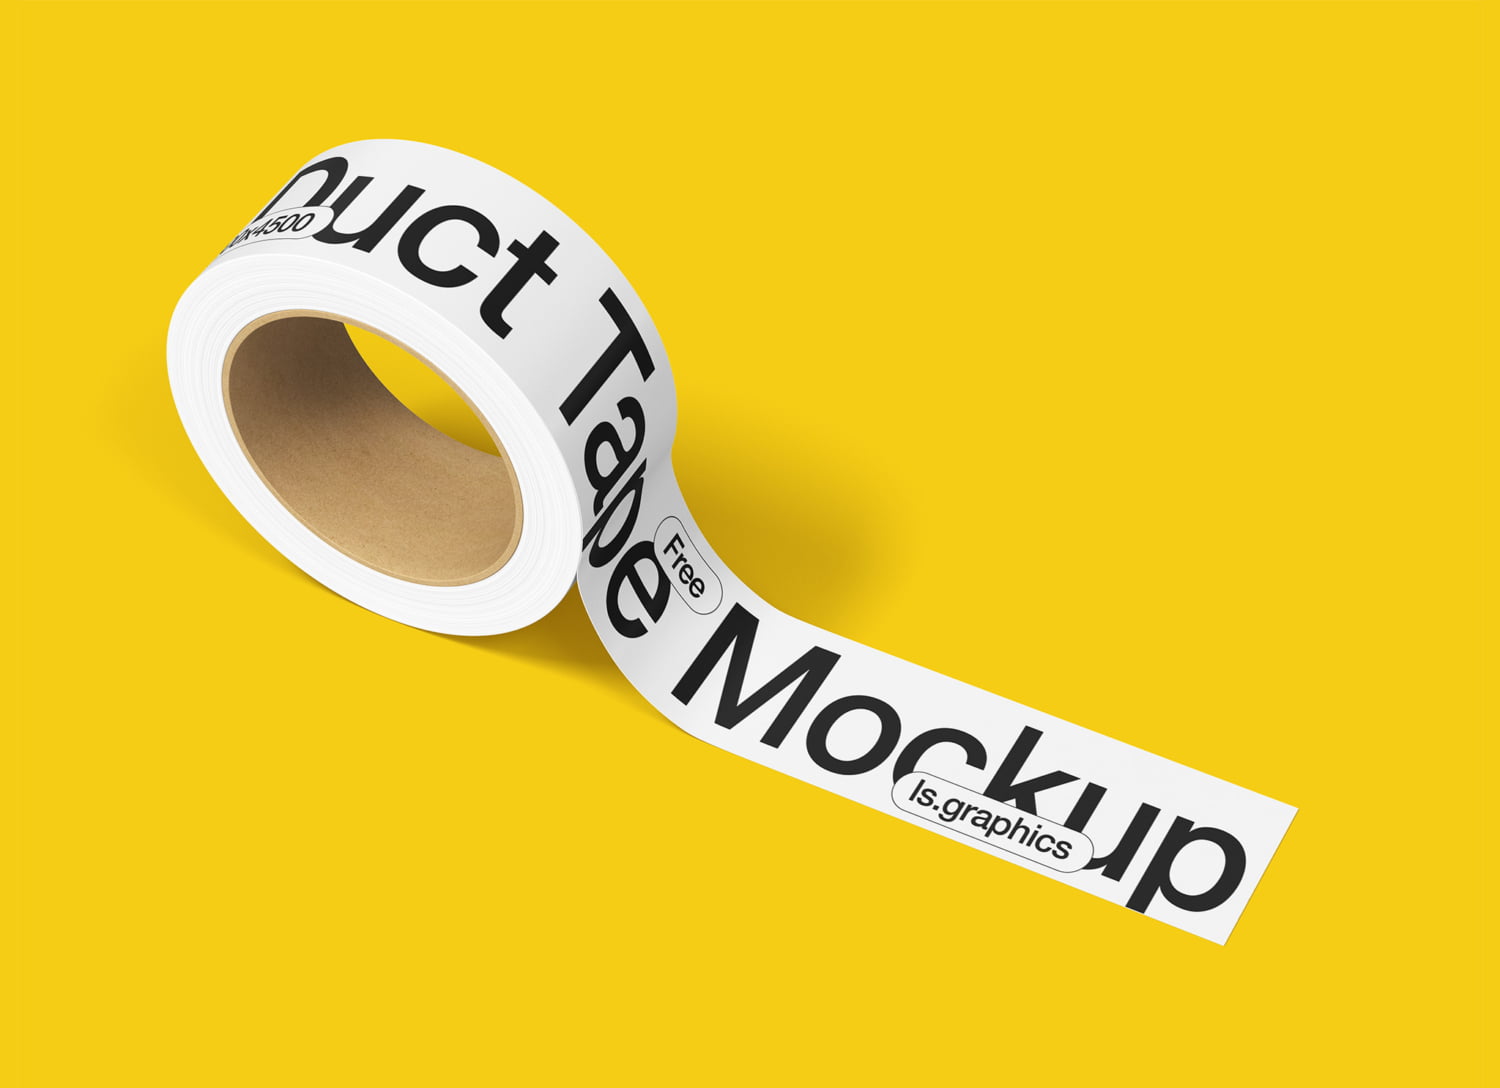 Download Duct Tape Mockup - GraphicsBunker